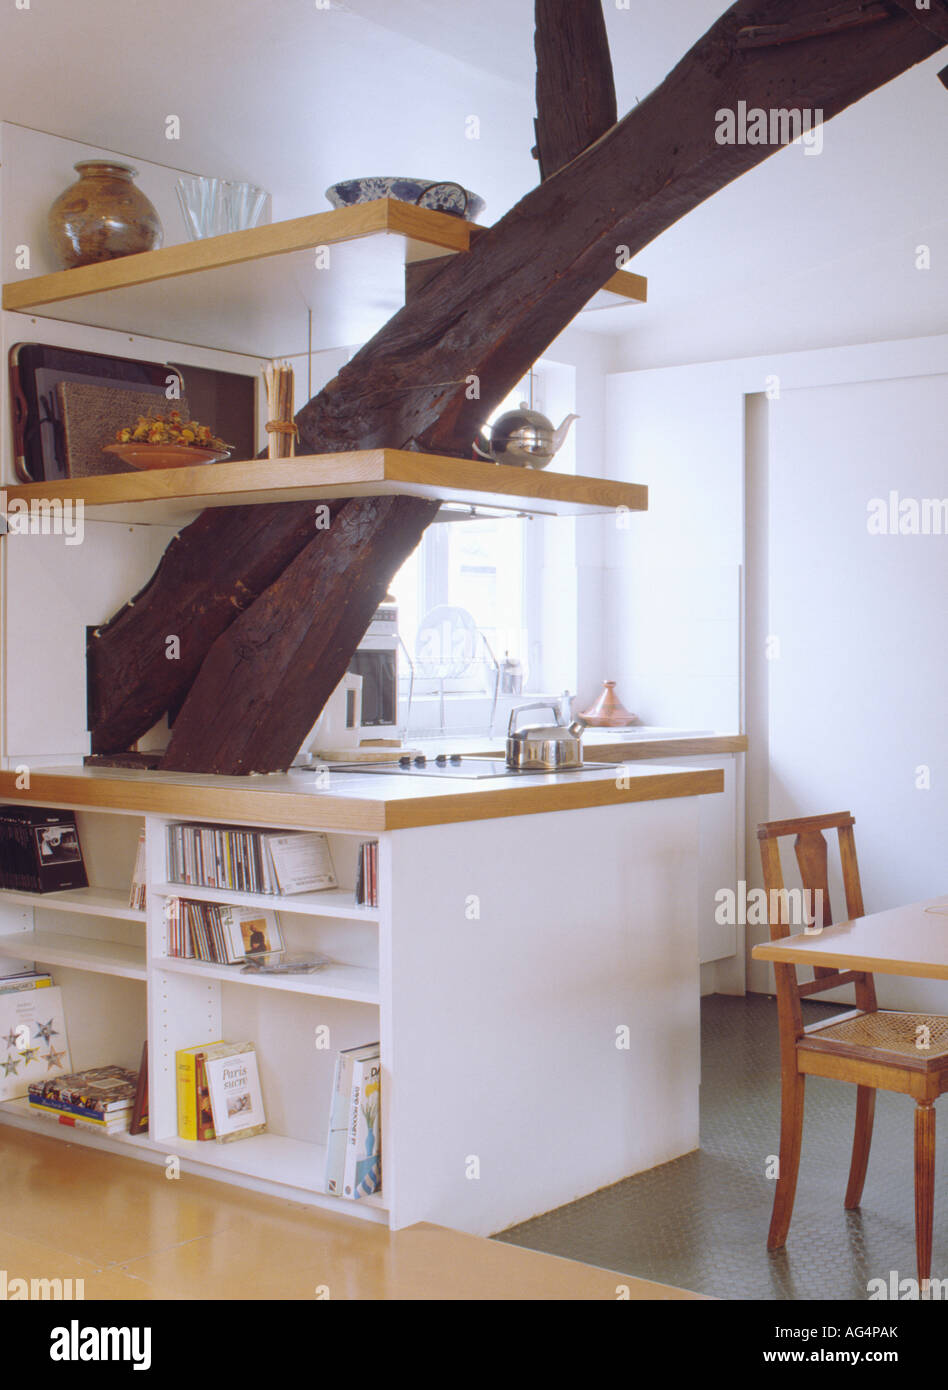 Shelves on large supporting beam in modern white loft kitchen with fitted units Stock Photo